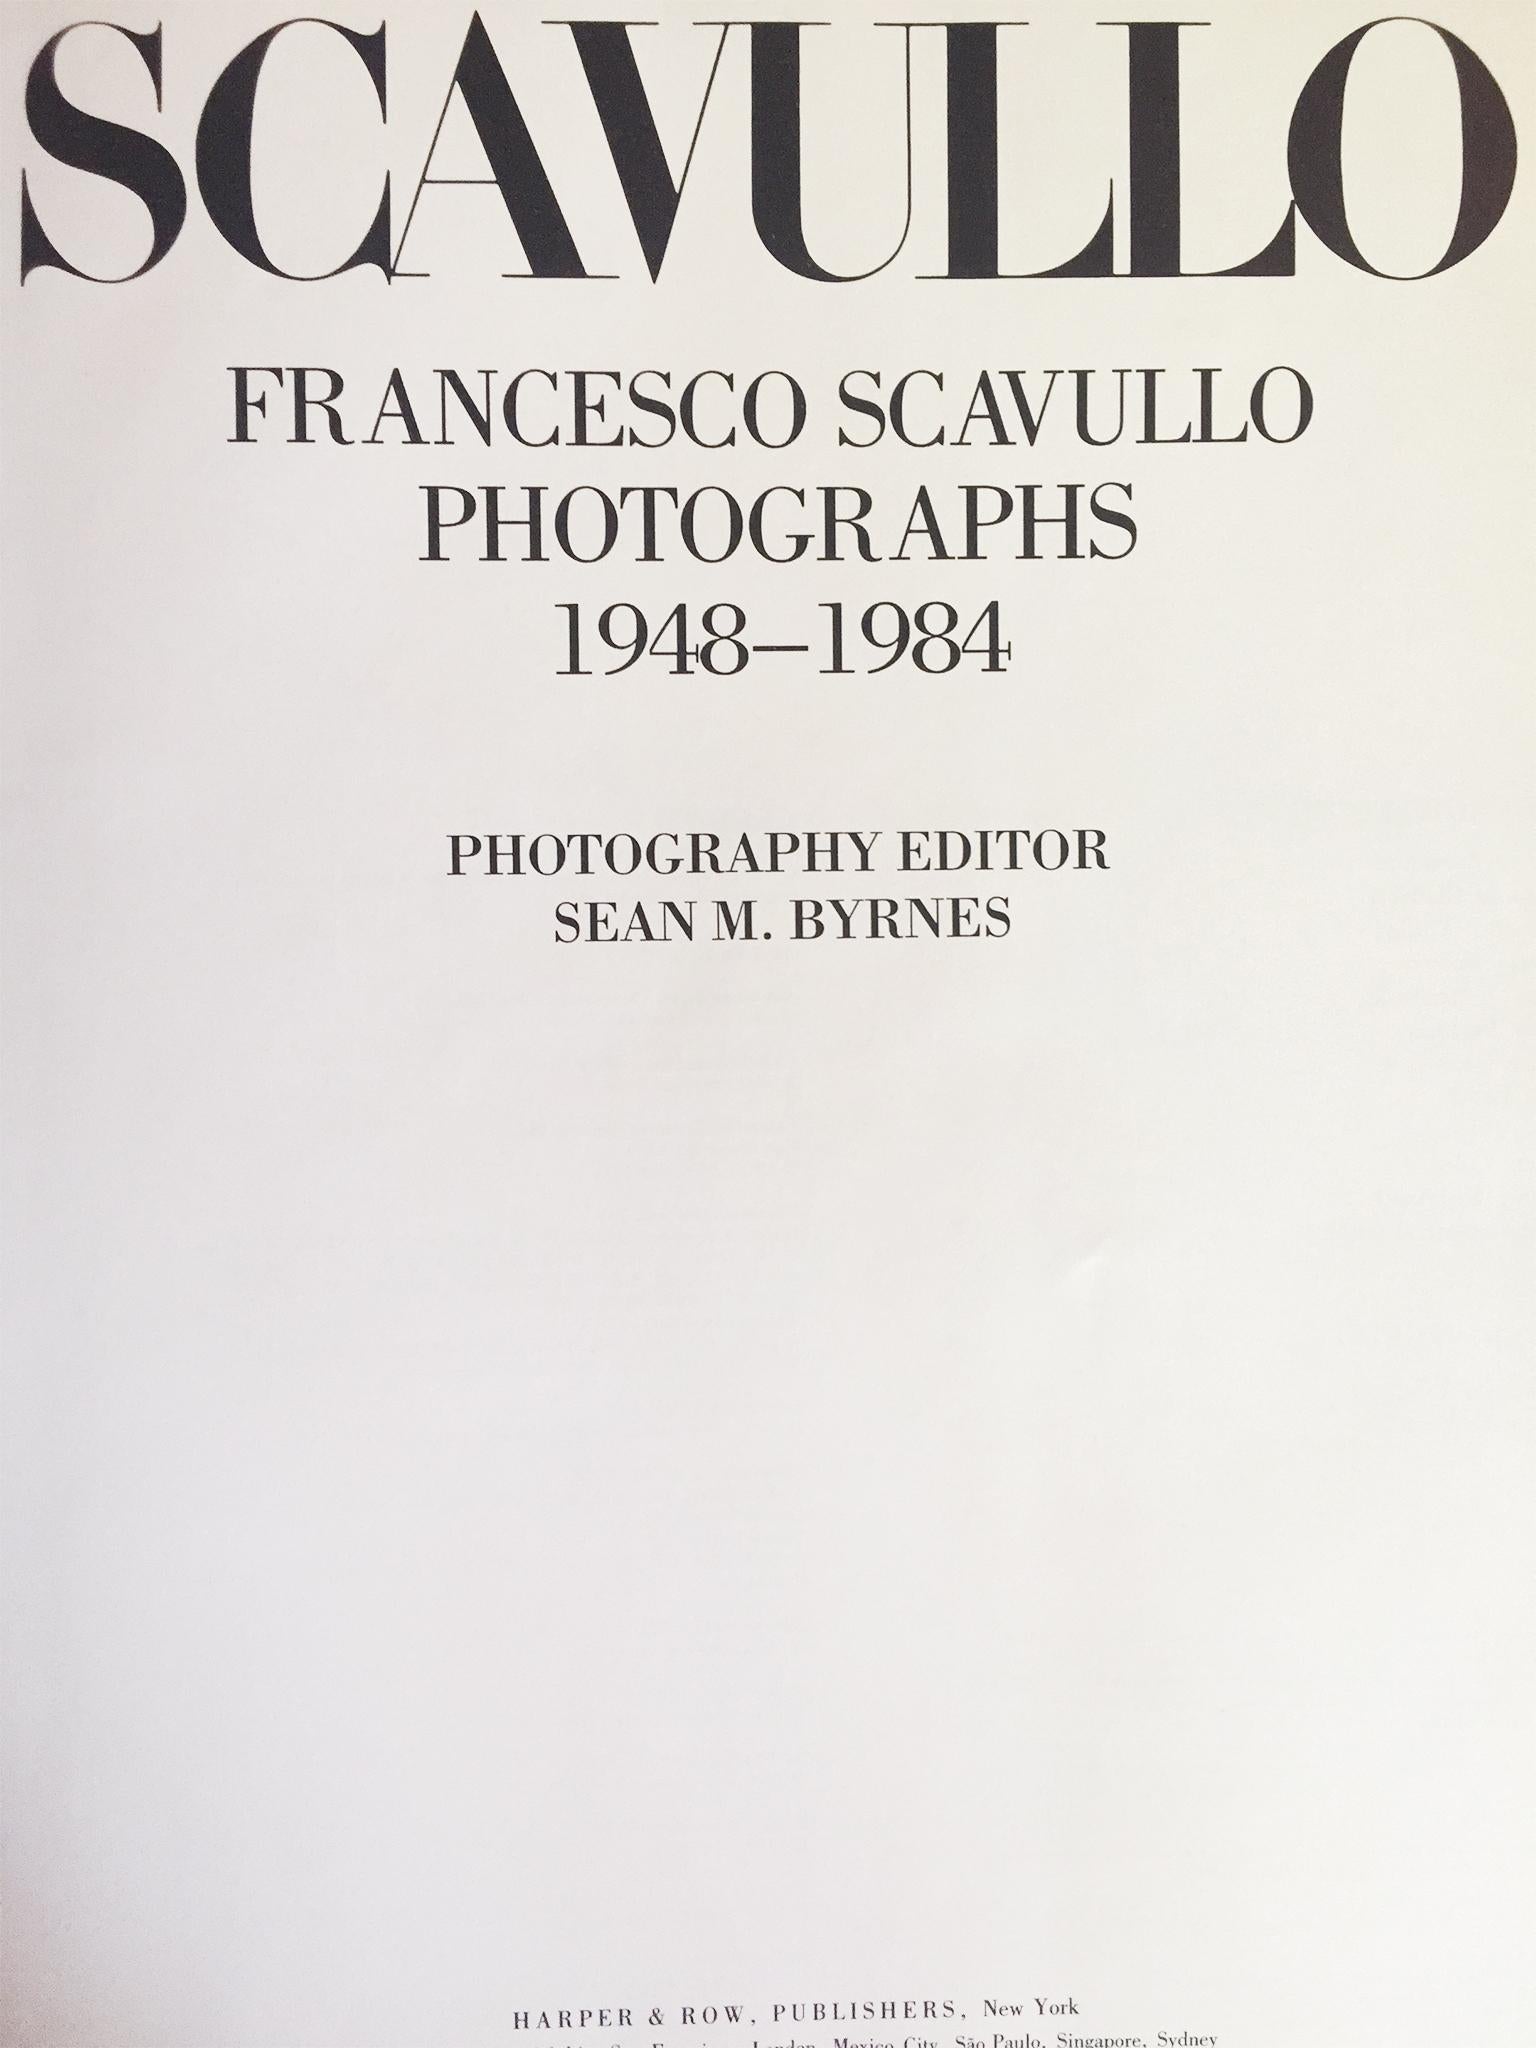 A wonderful collection of Francesco Scavullo's black-and-white photographs from 1948 through 1984. These include his fashion spreads and intimate portraits of artists, actors, and other luminaries.

Hardcover with glossy book jacket. 270. Harper &